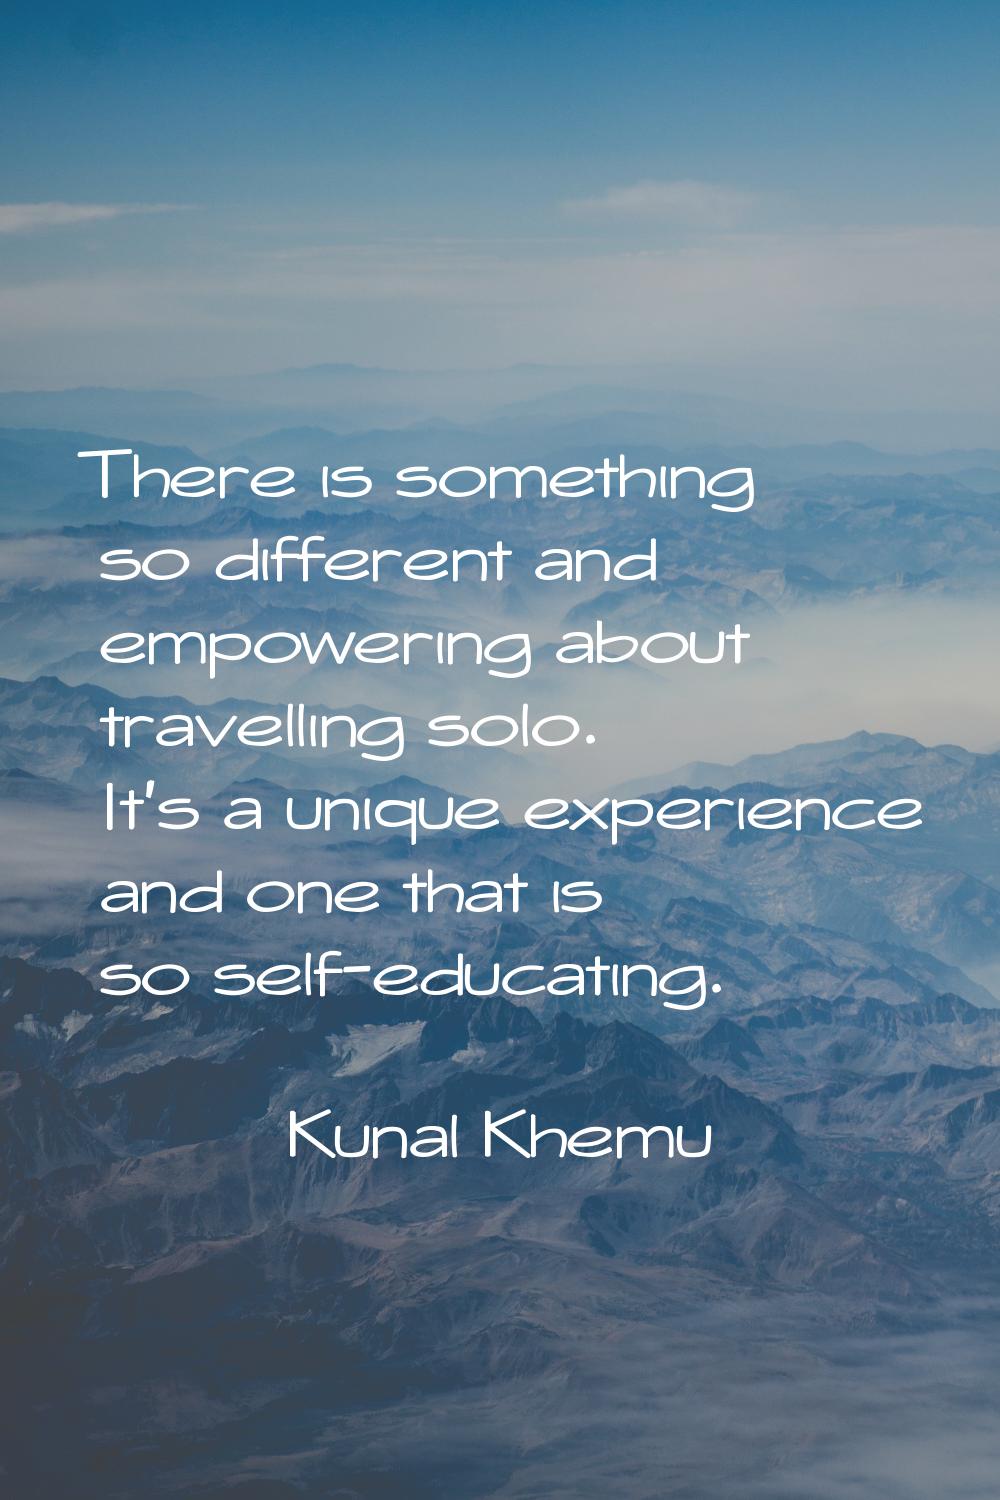 There is something so different and empowering about travelling solo. It's a unique experience and 